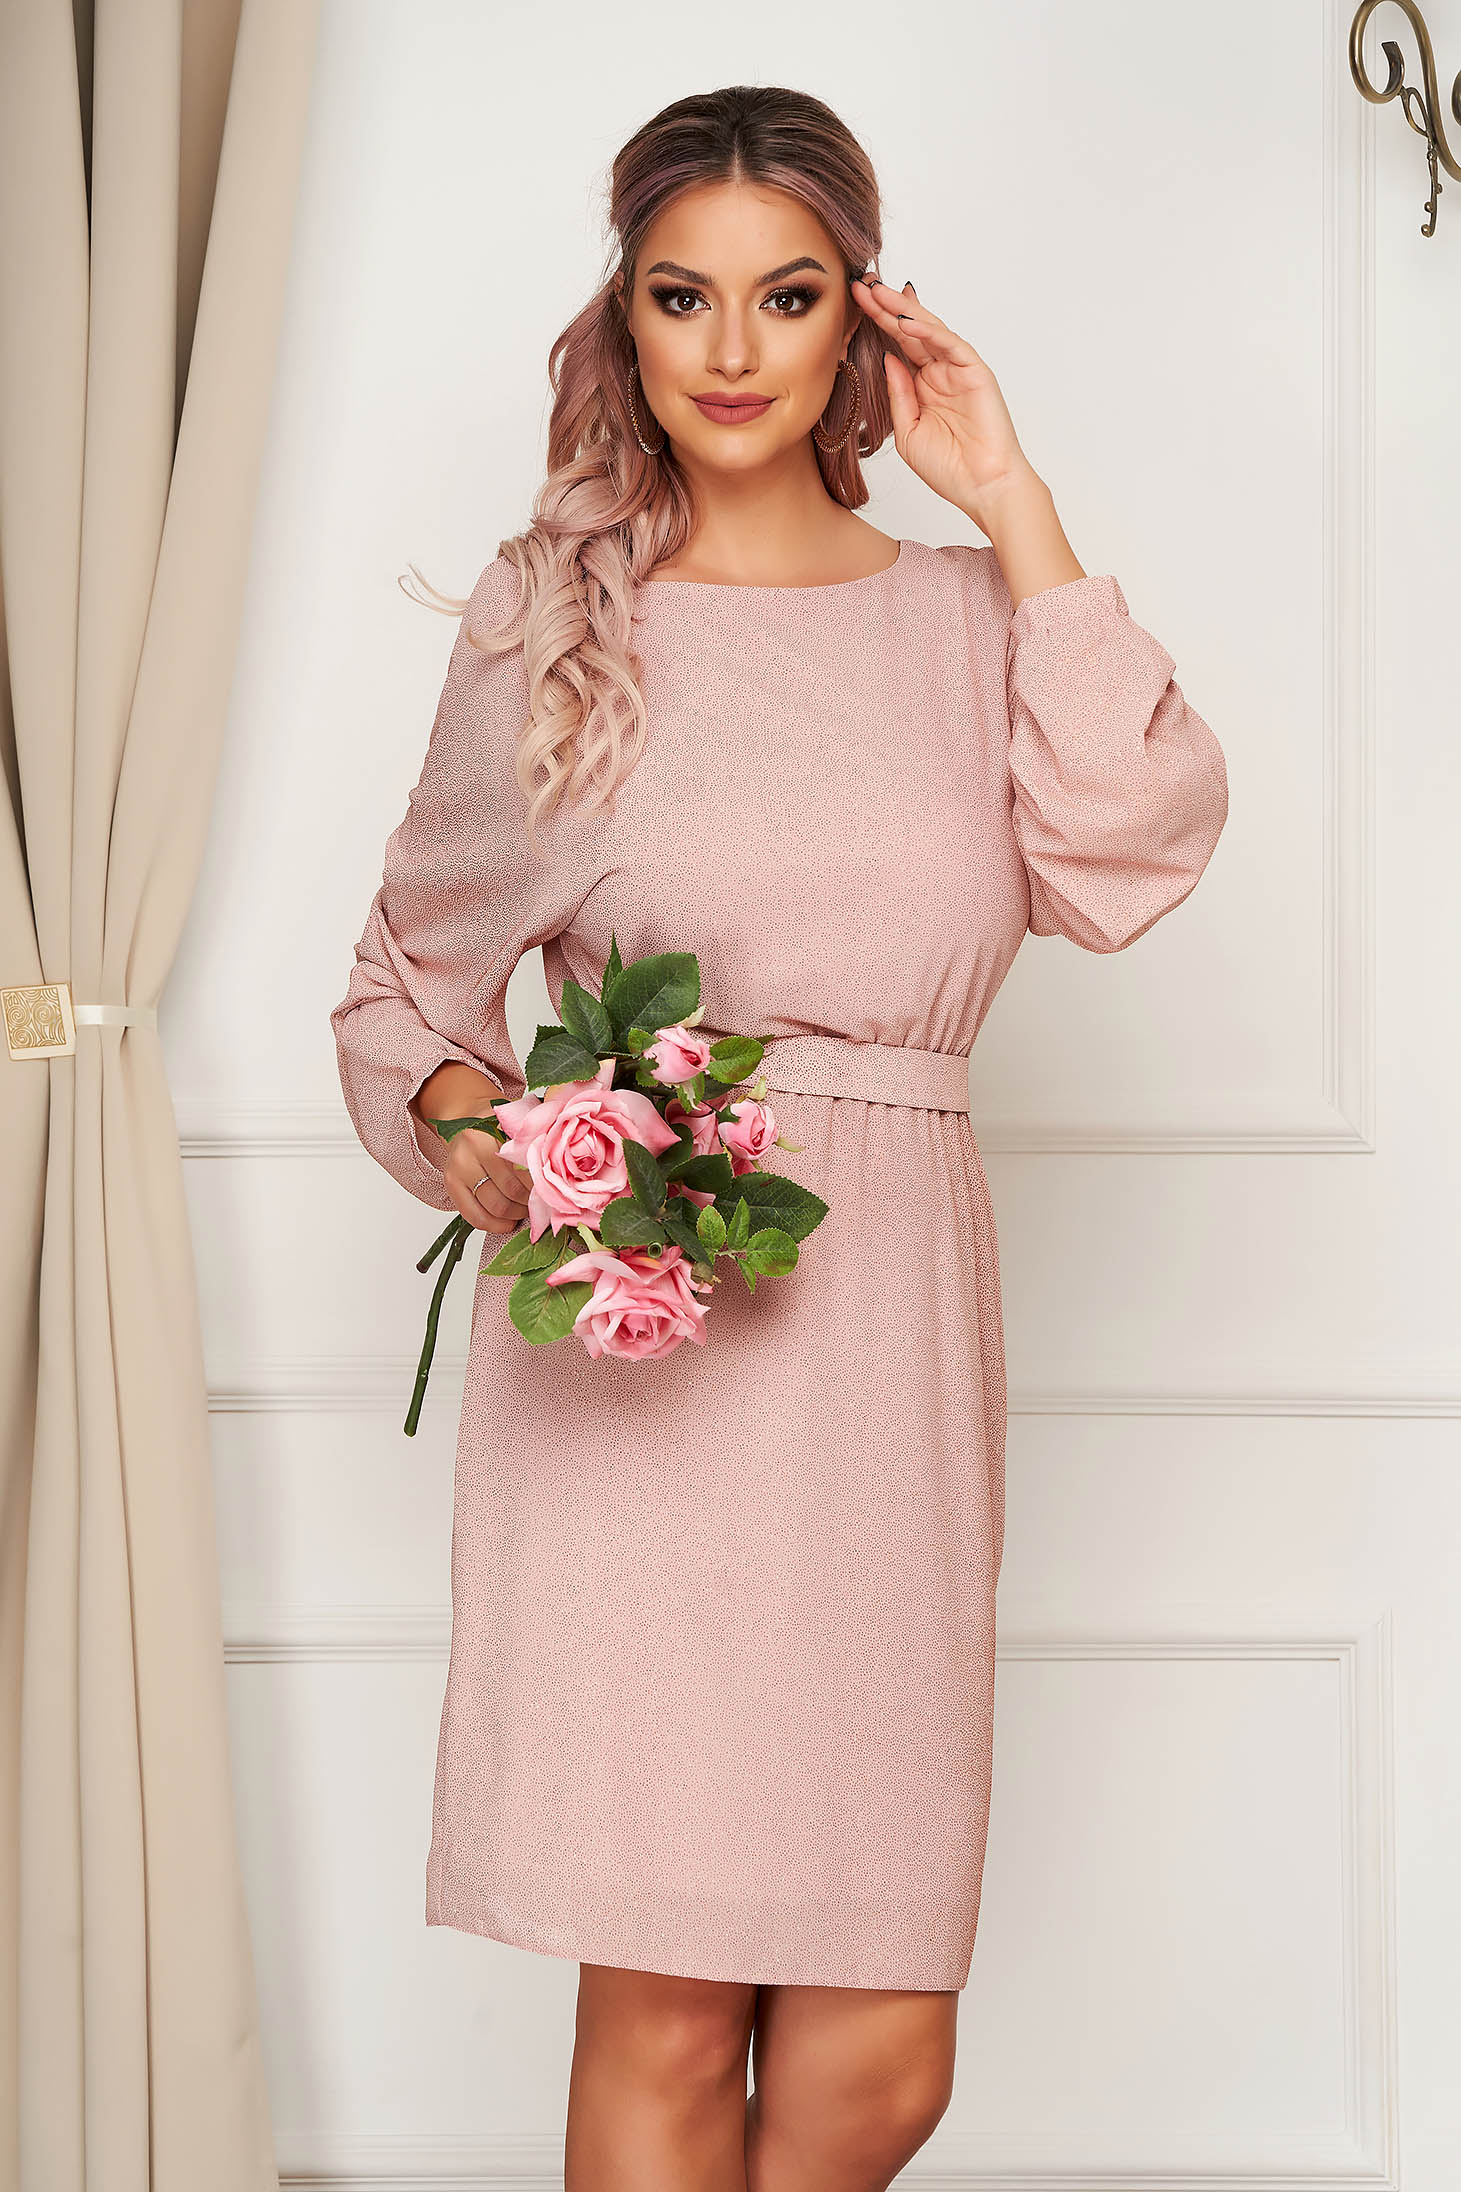 Dress StarShinerS lightpink midi elegant from veil fabric with glitter details large sleeves